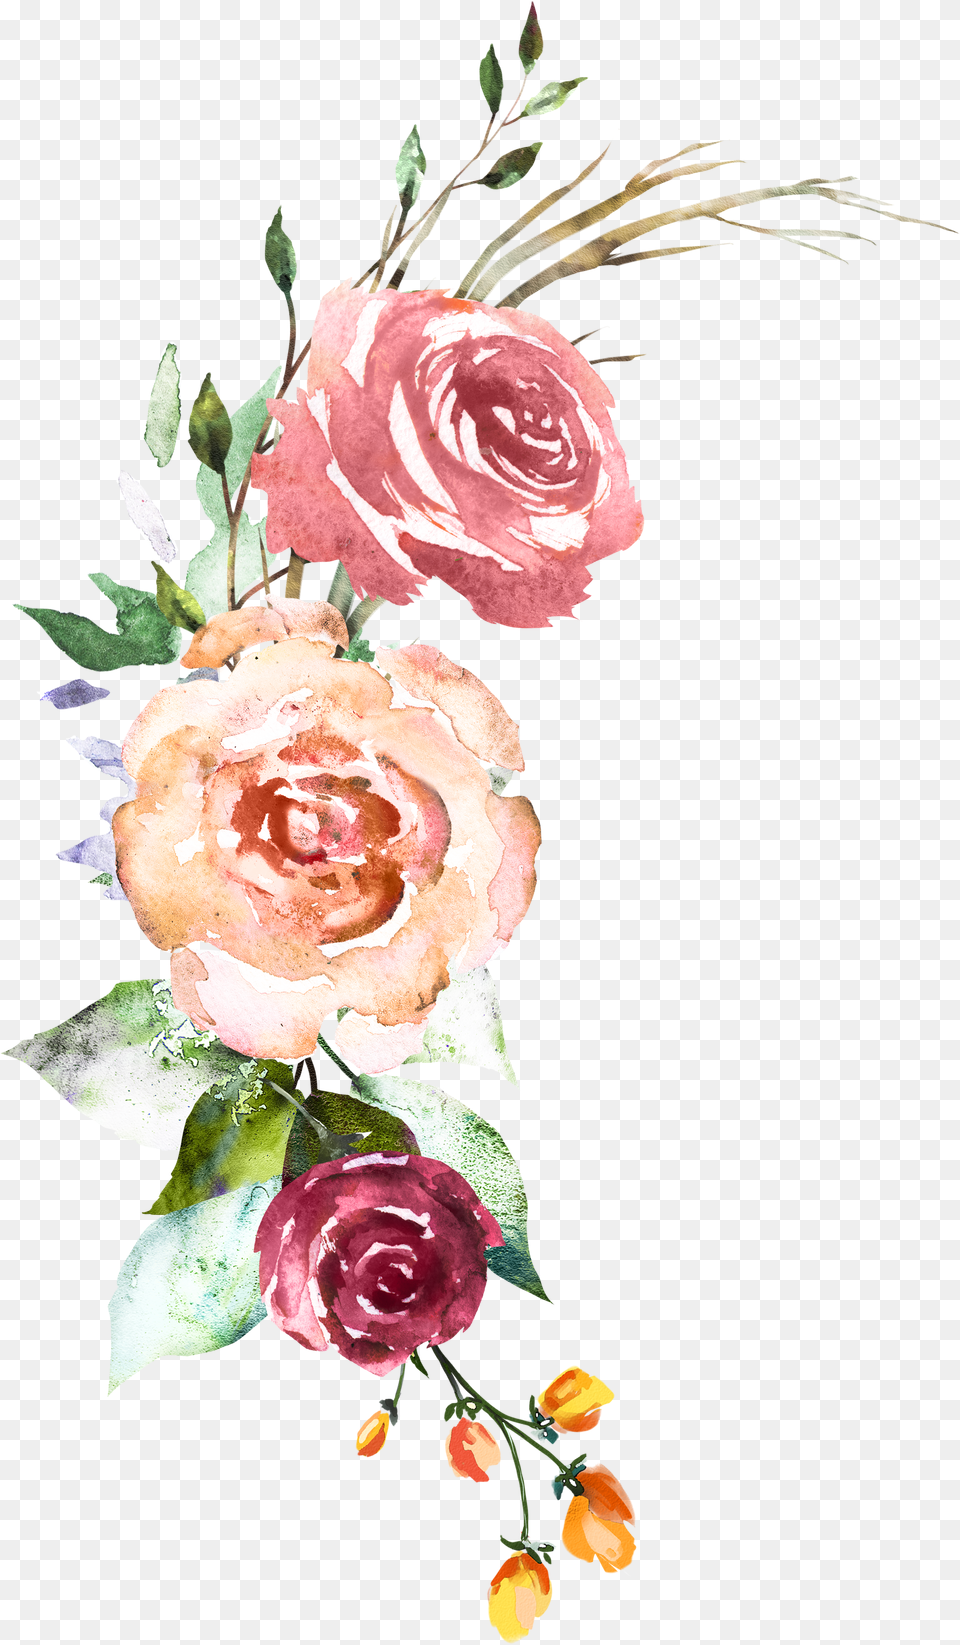 Download Garden Roses Hd Uokplrs Free Png